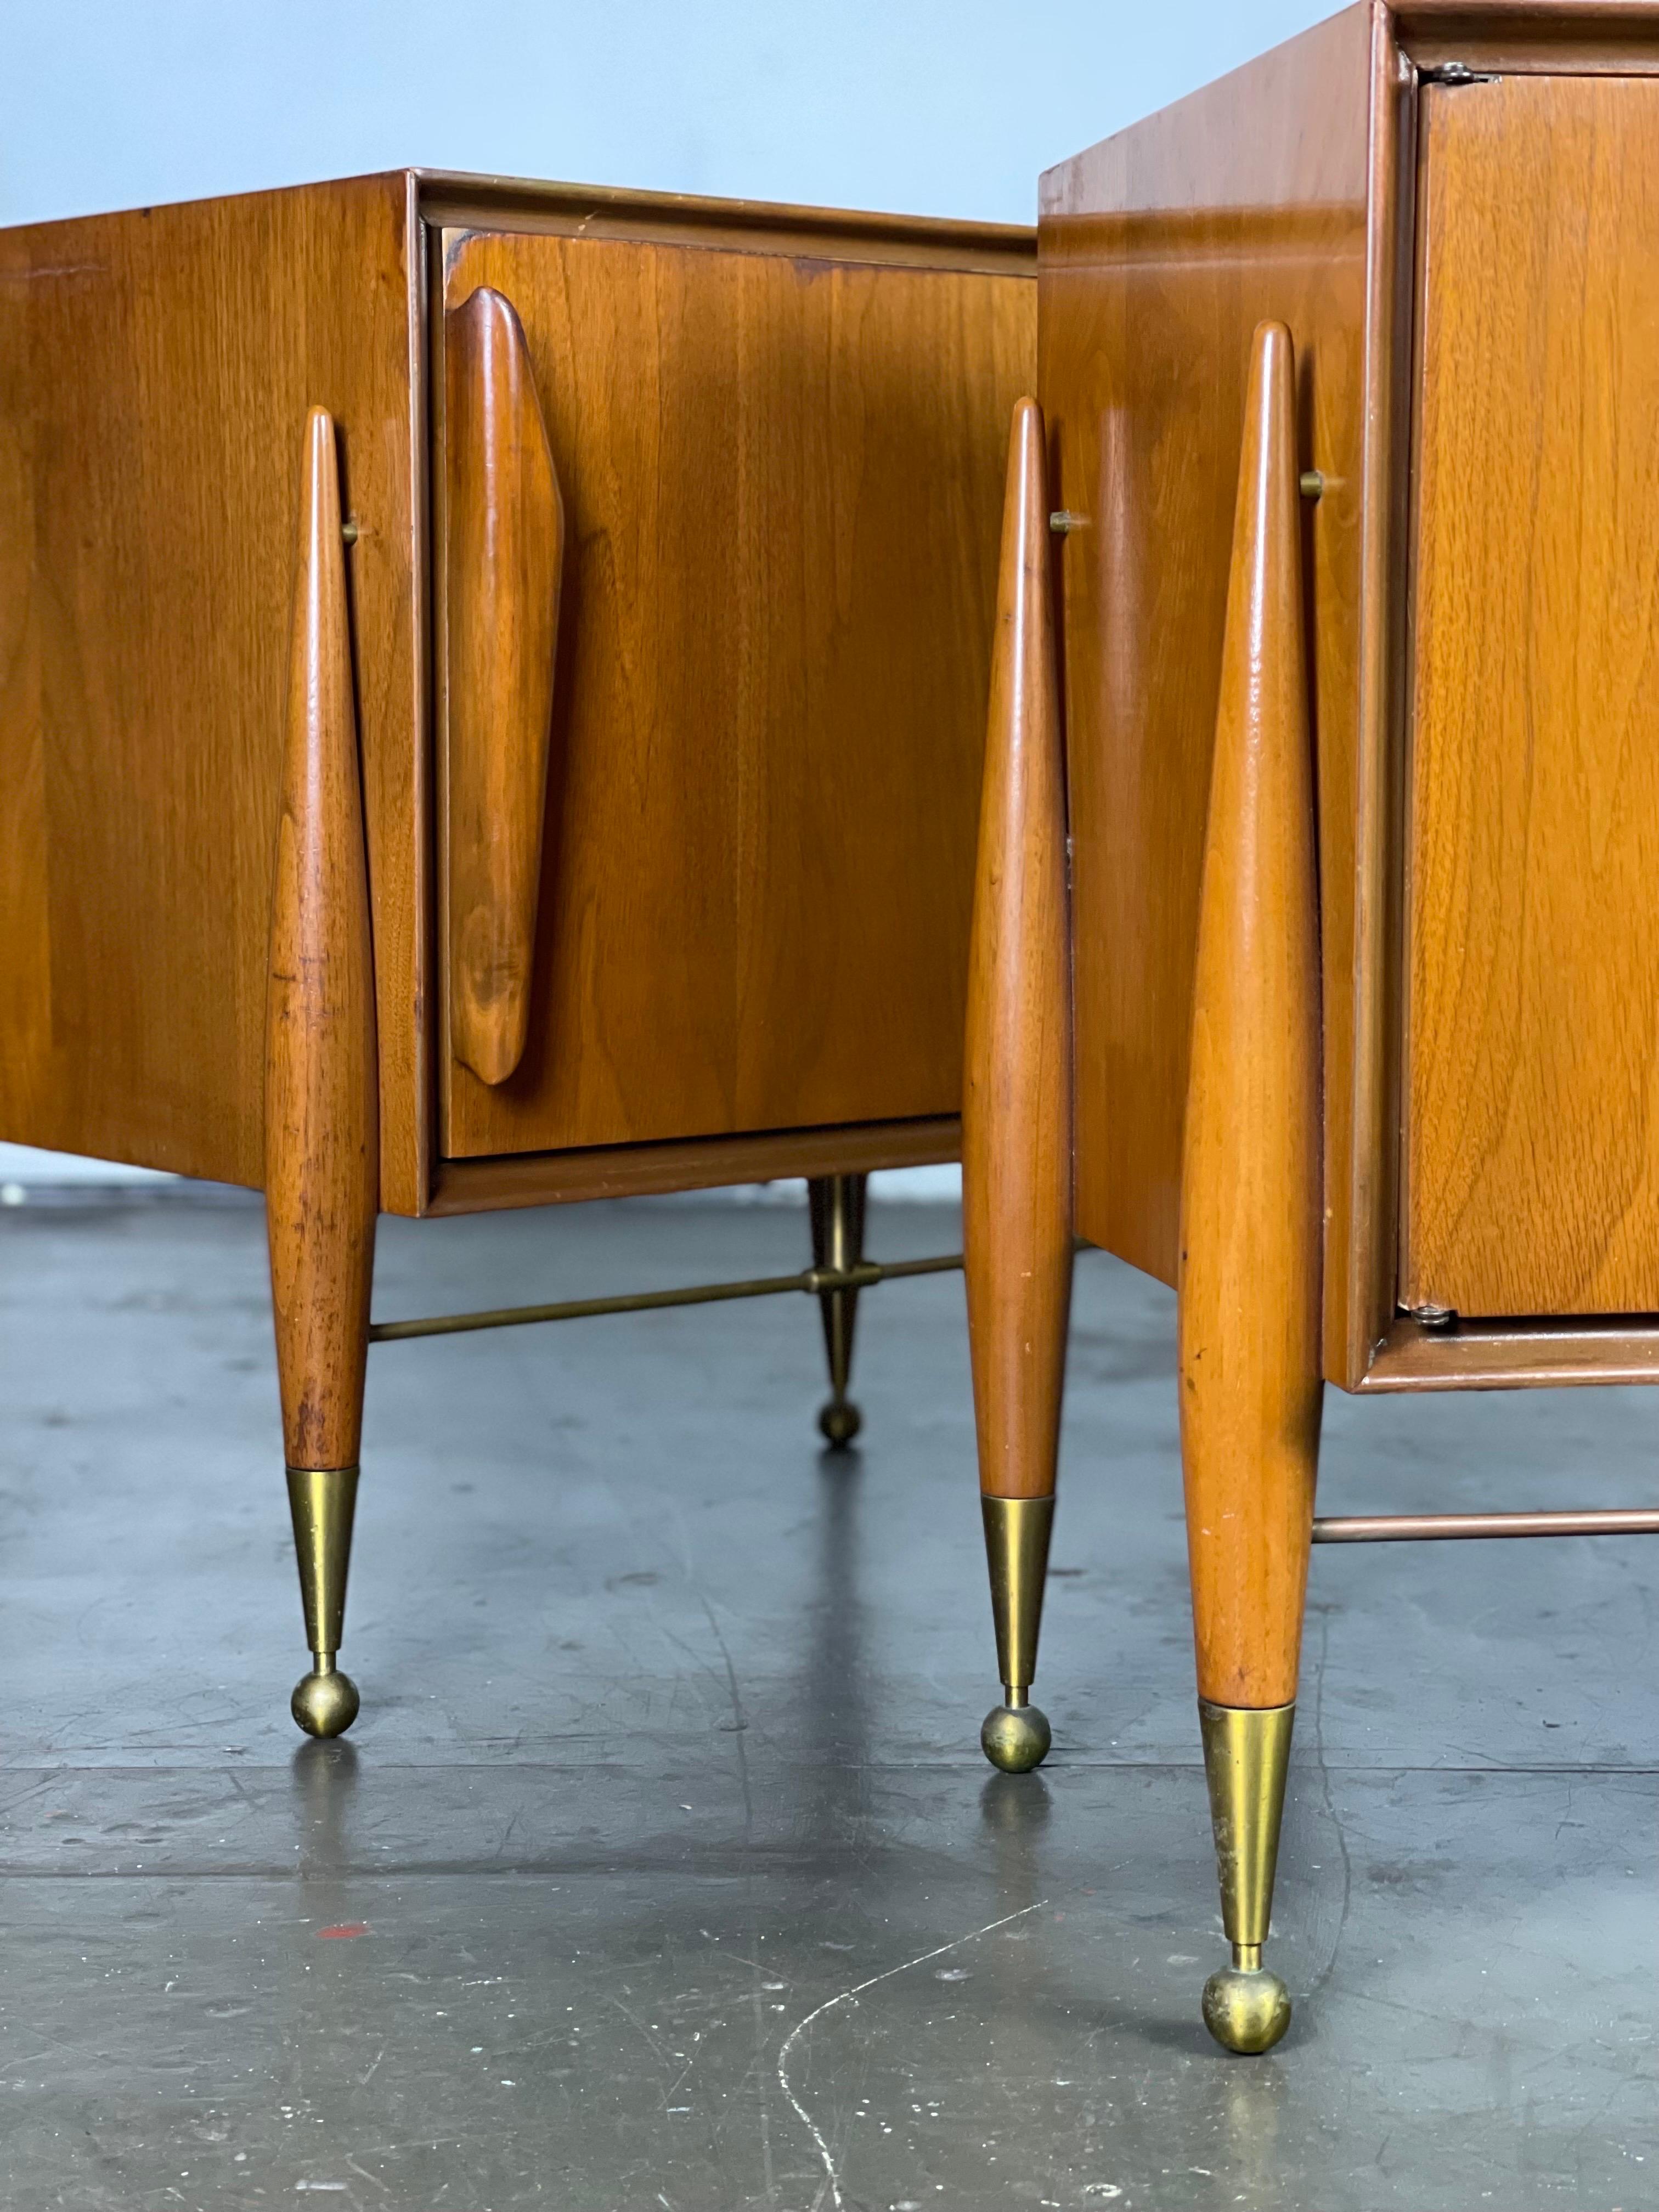 Striking Mid-Century Modern Nighstands by Specialty Woodcraft, 1957  In Fair Condition For Sale In Framingham, MA